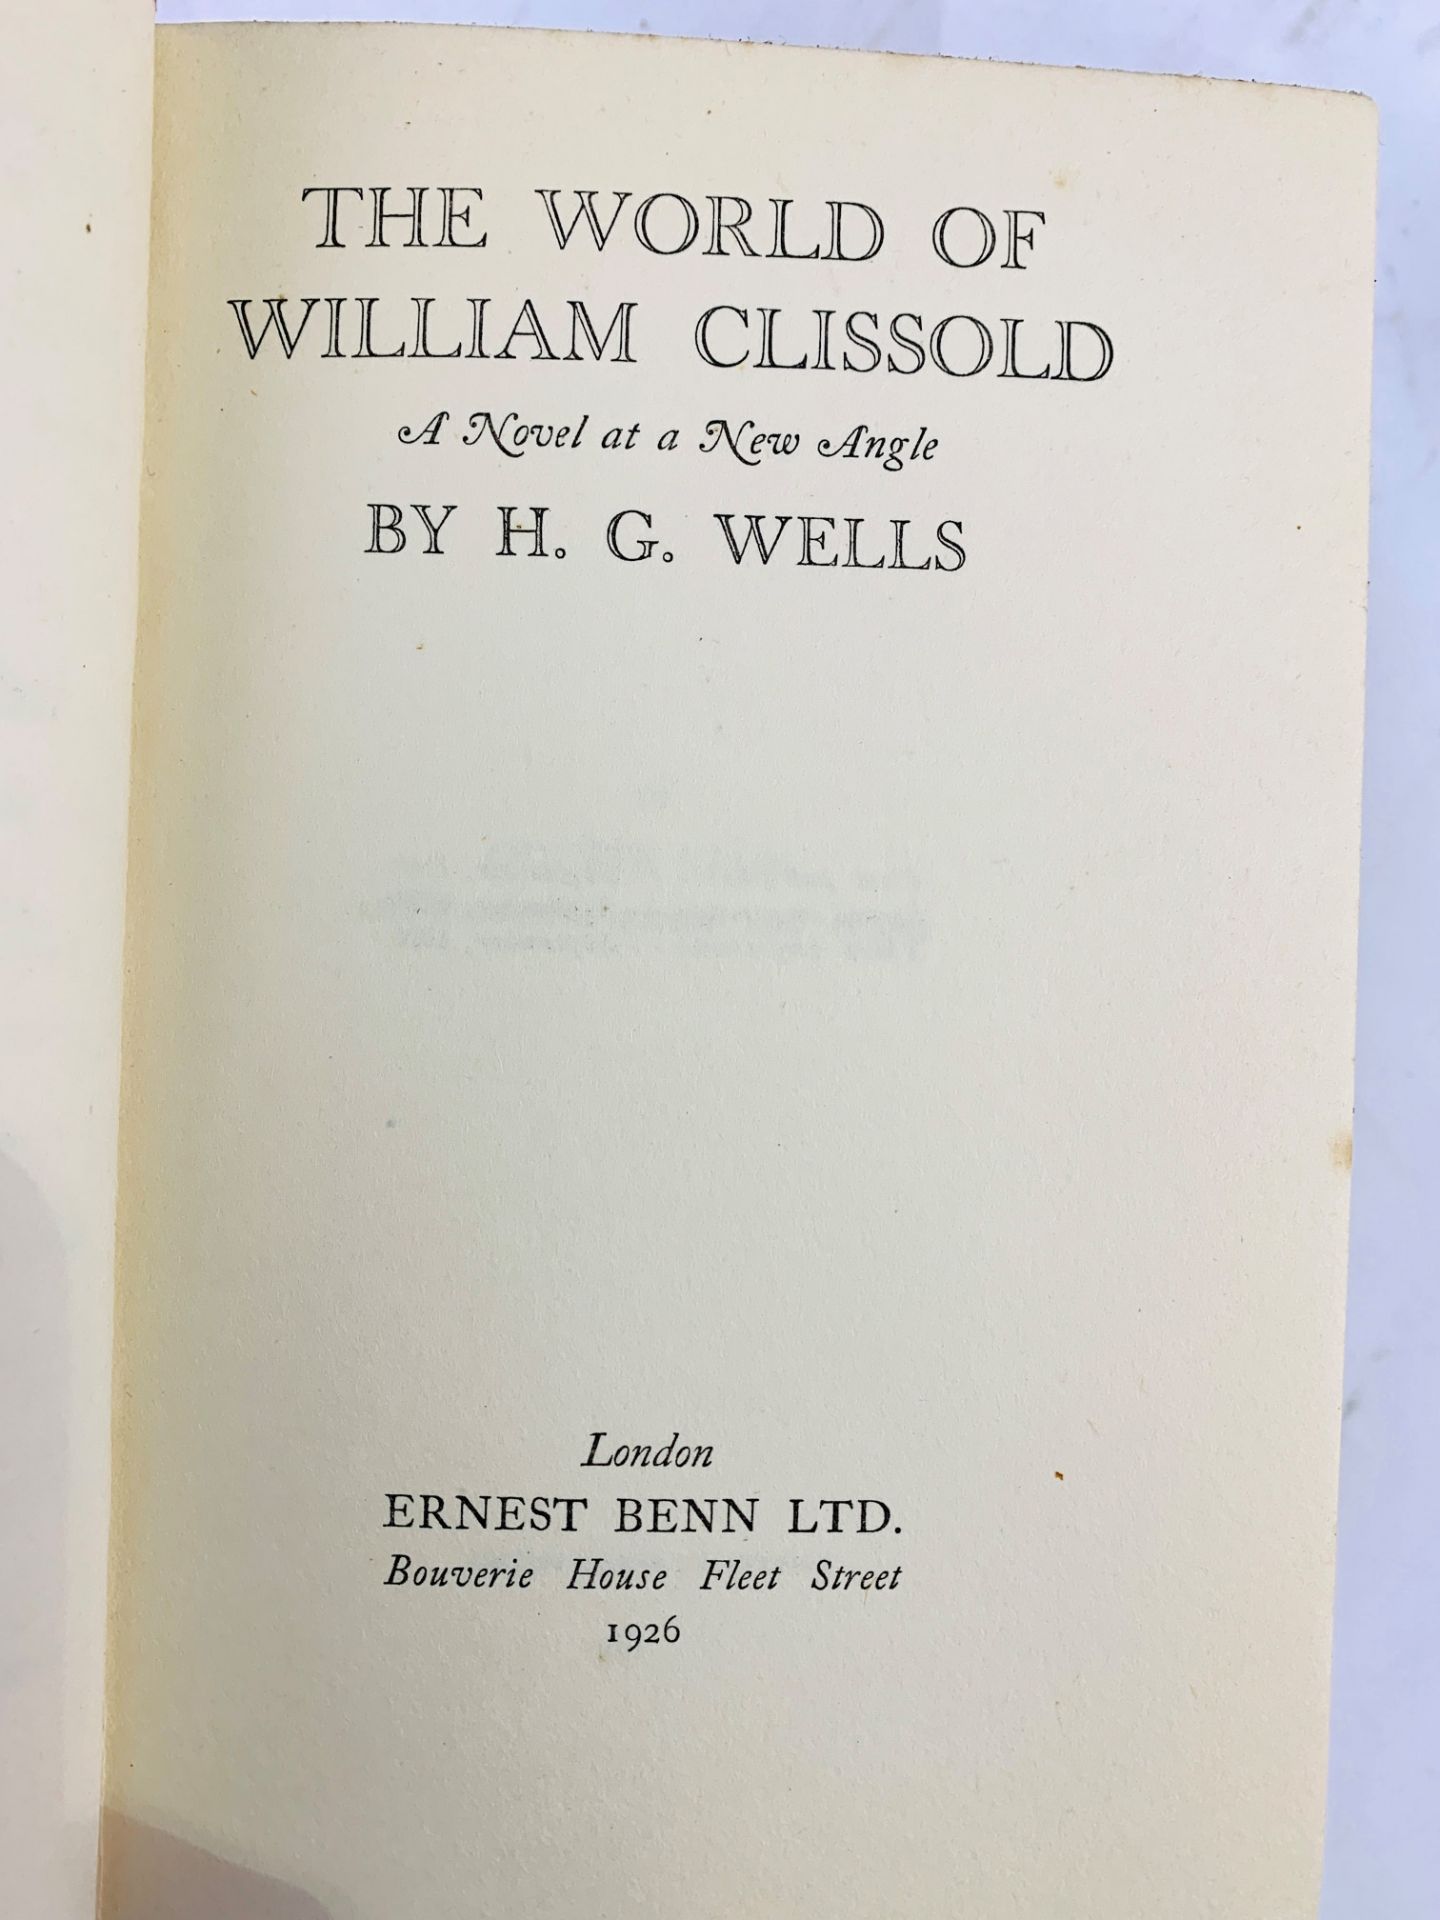 HG Wells: The World of William Clissold, 1926 - Image 4 of 4